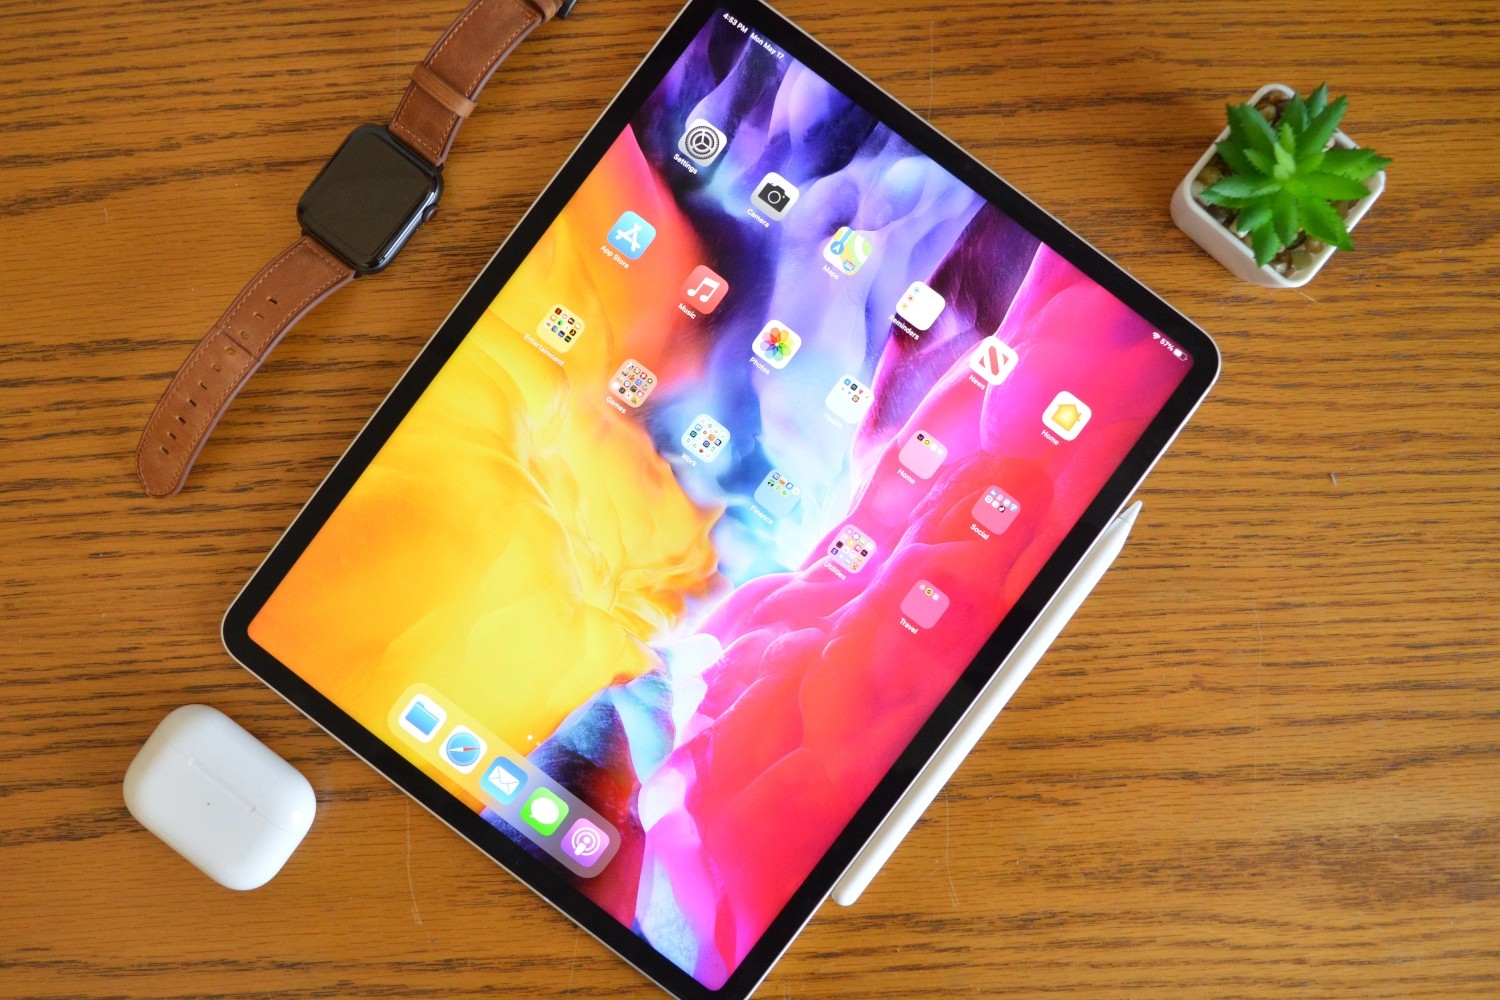 Apple wants it bigger: iPad Pro with a giant 16 display to launch in 2023